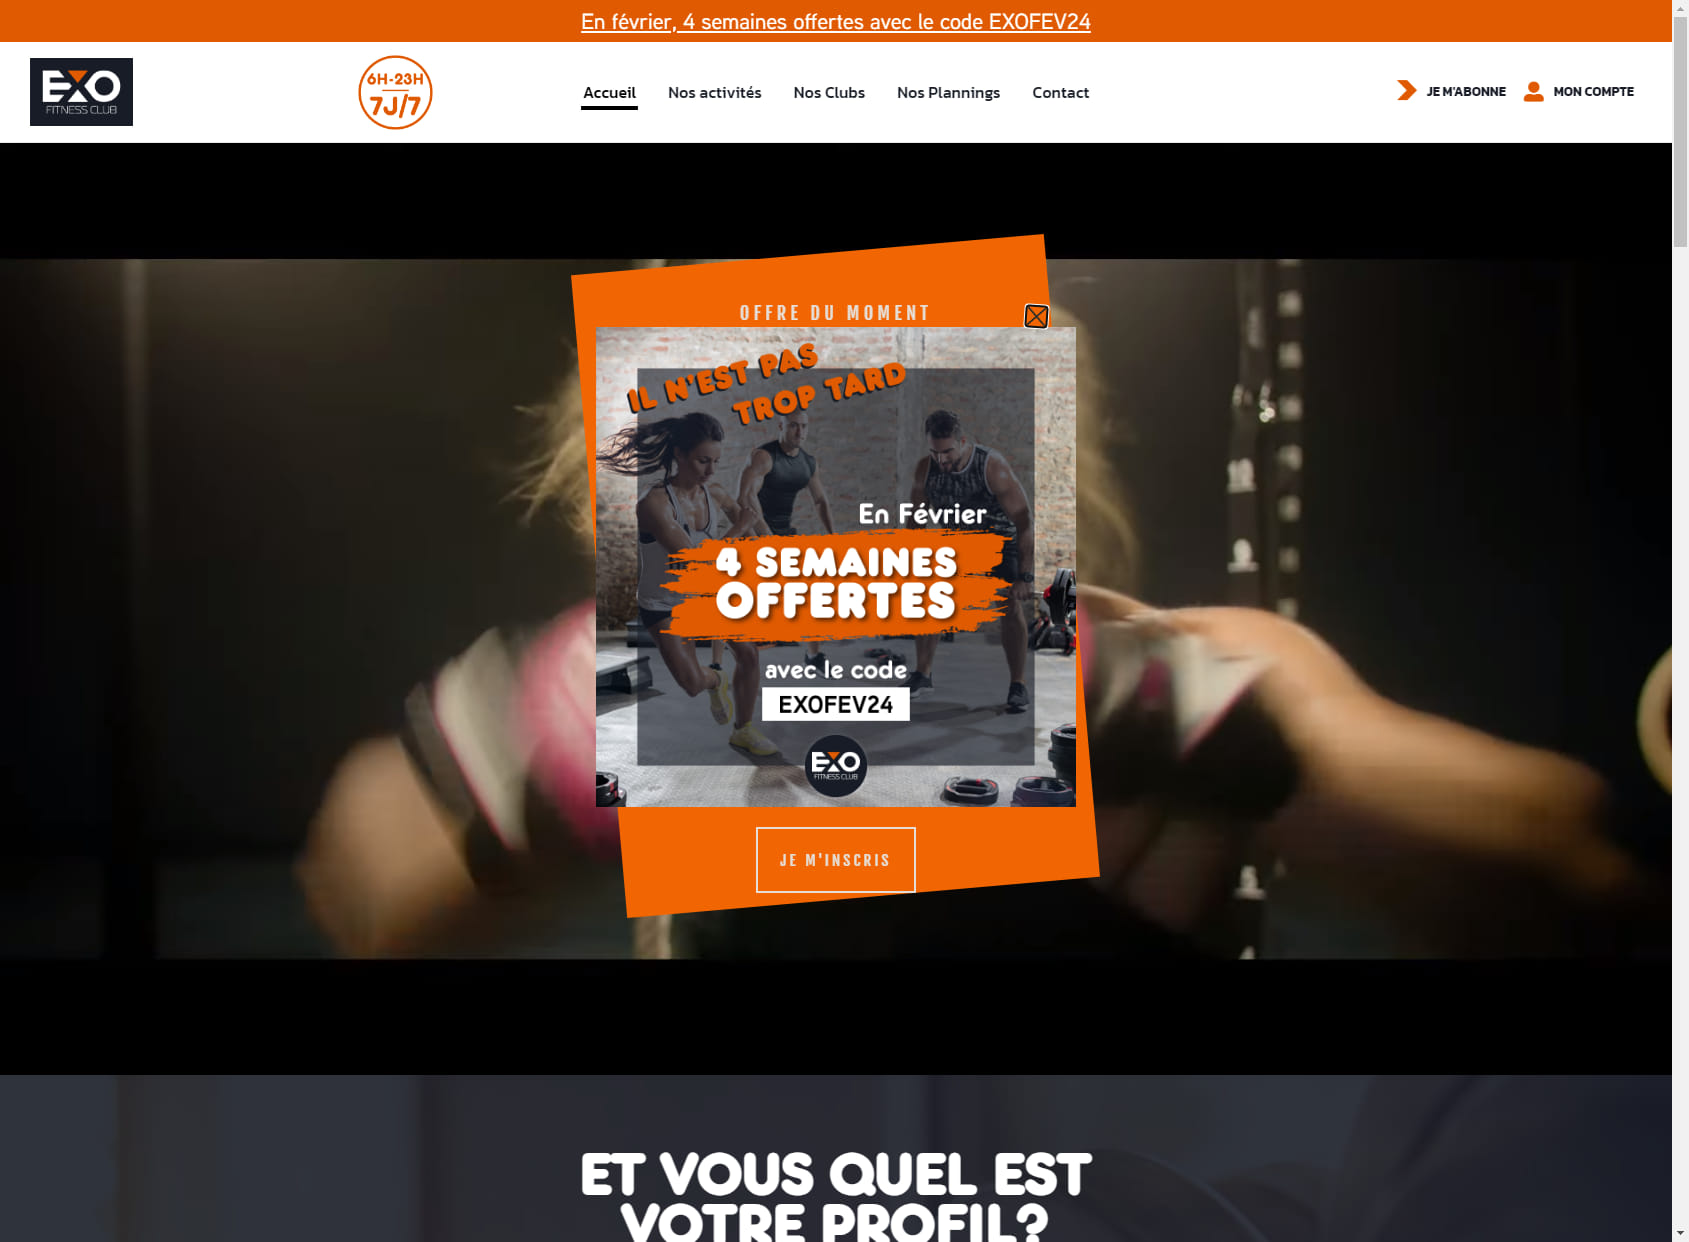 easyGym Poitiers